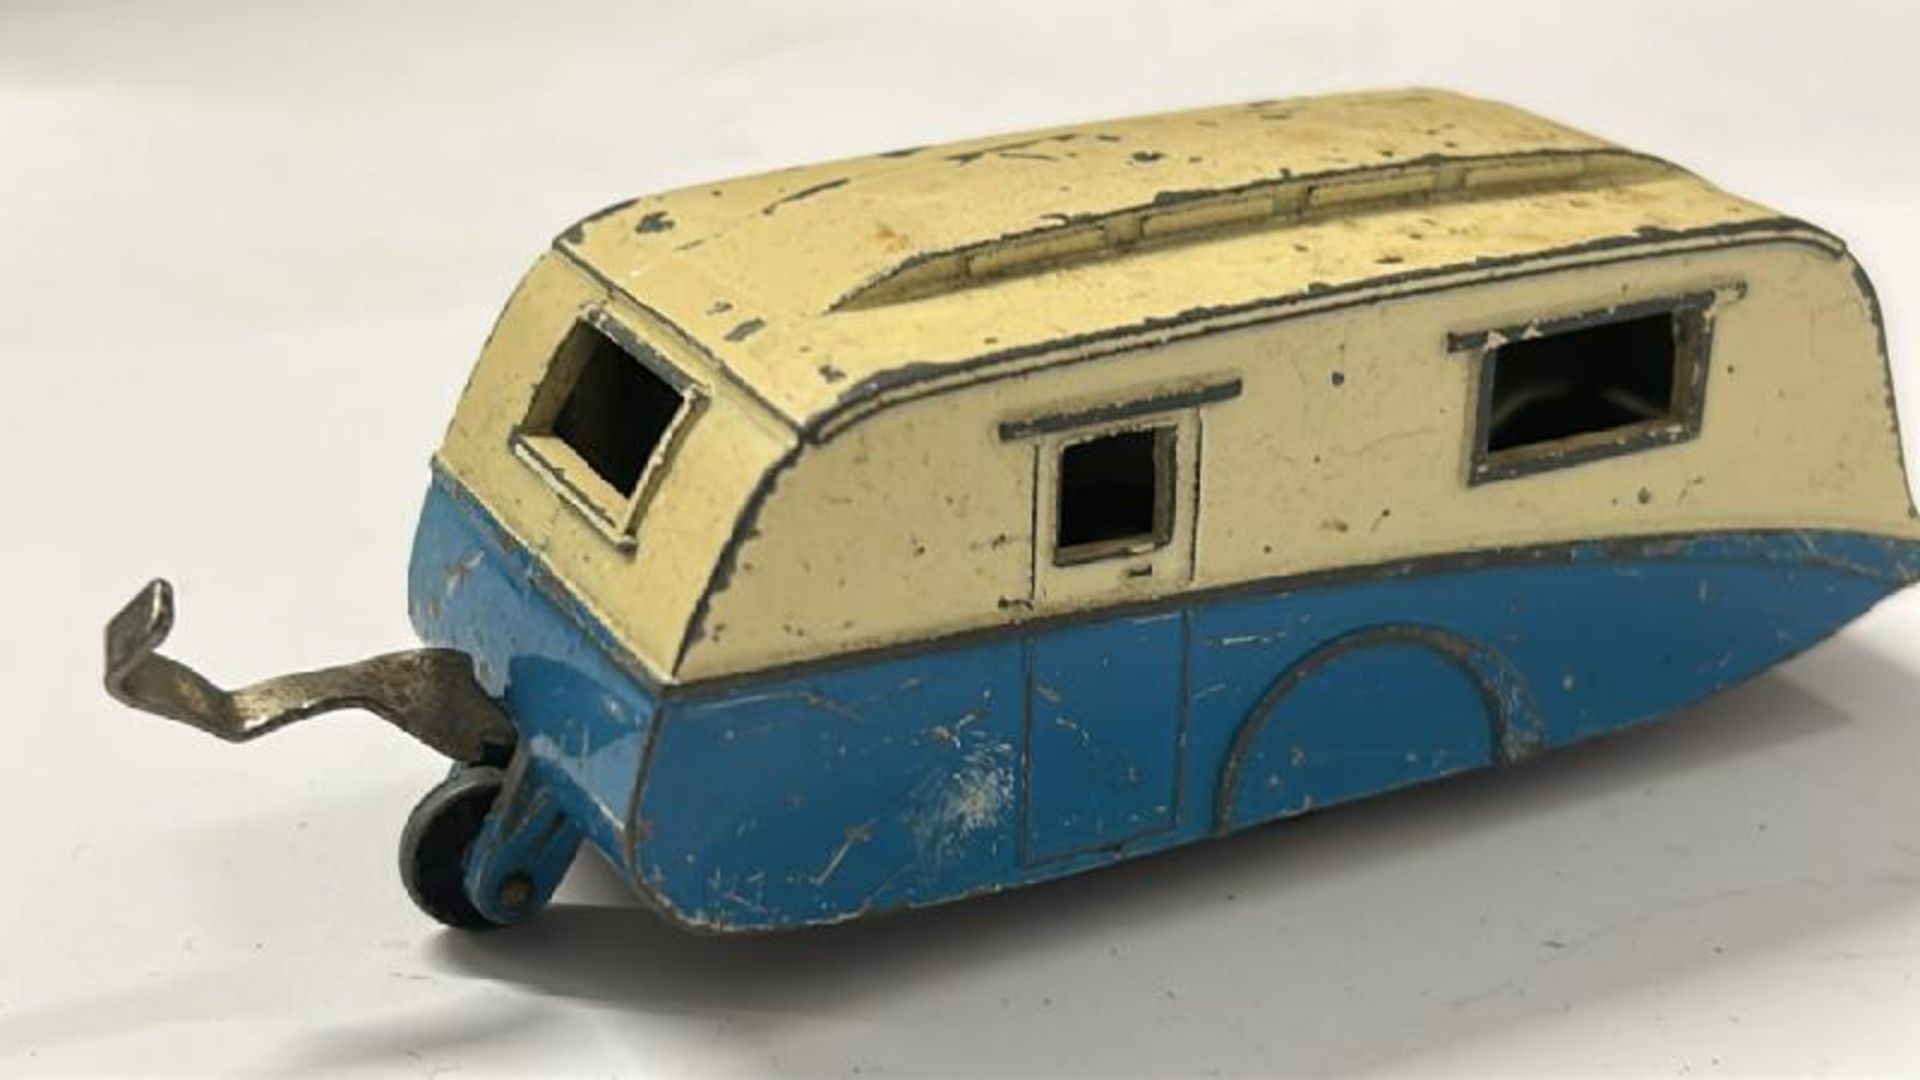 Unboxed Dinky & Corgi cars and caravans including Corgi Silver Shadow Rolls Royce and Dinky Rolls - Image 20 of 23